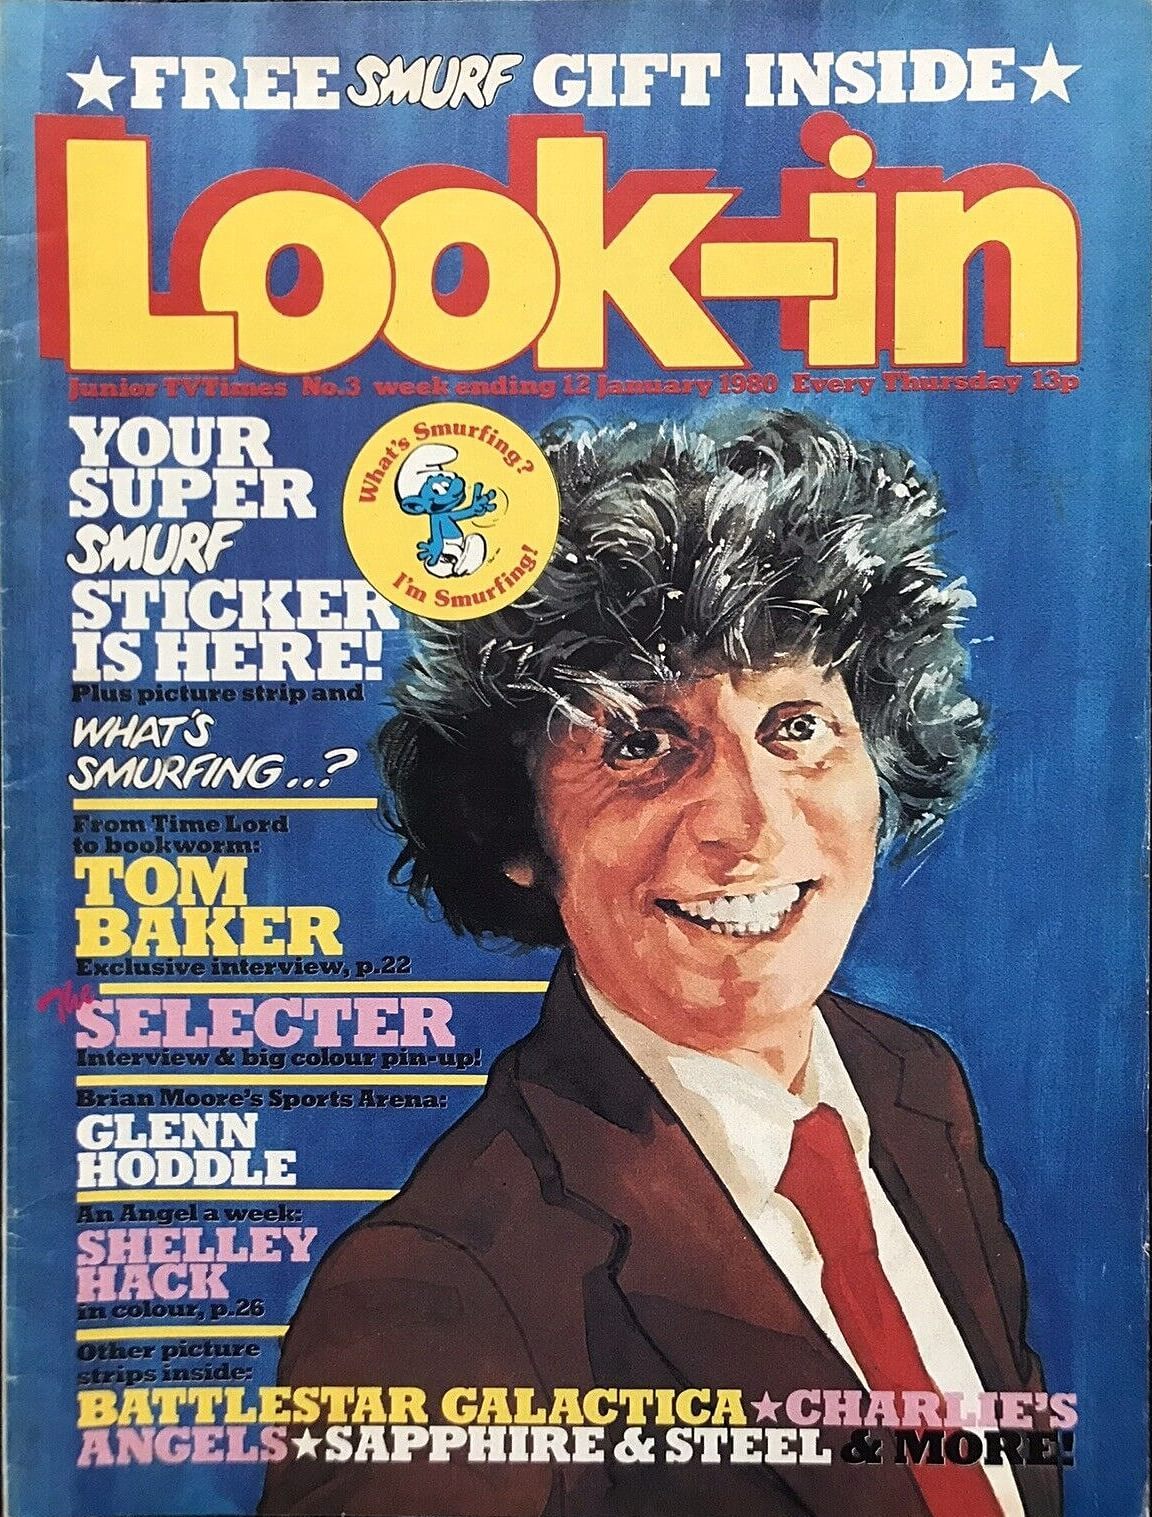 <p>Look-in magazine (12 Jan 1980) featuring an illustration of Tom Baker (the fourth Doctor) and a free Smurf sticker!</p>